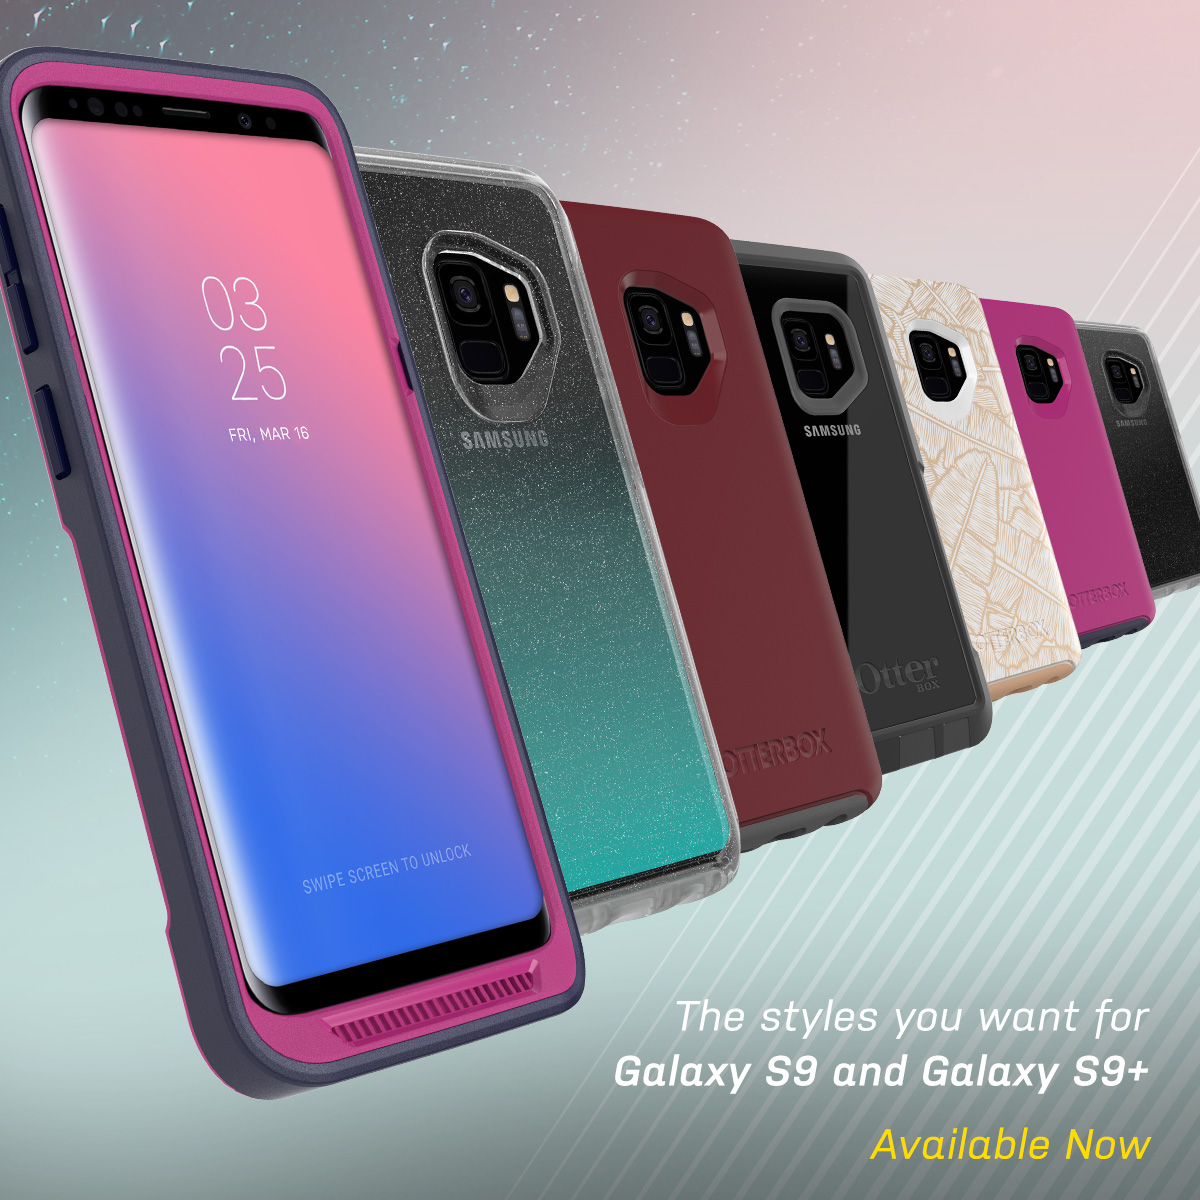 Geduld Componeren Azië OtterBox Phone Cases for Samsung Galaxy S9 and S9+! - The Tech Revolutionist